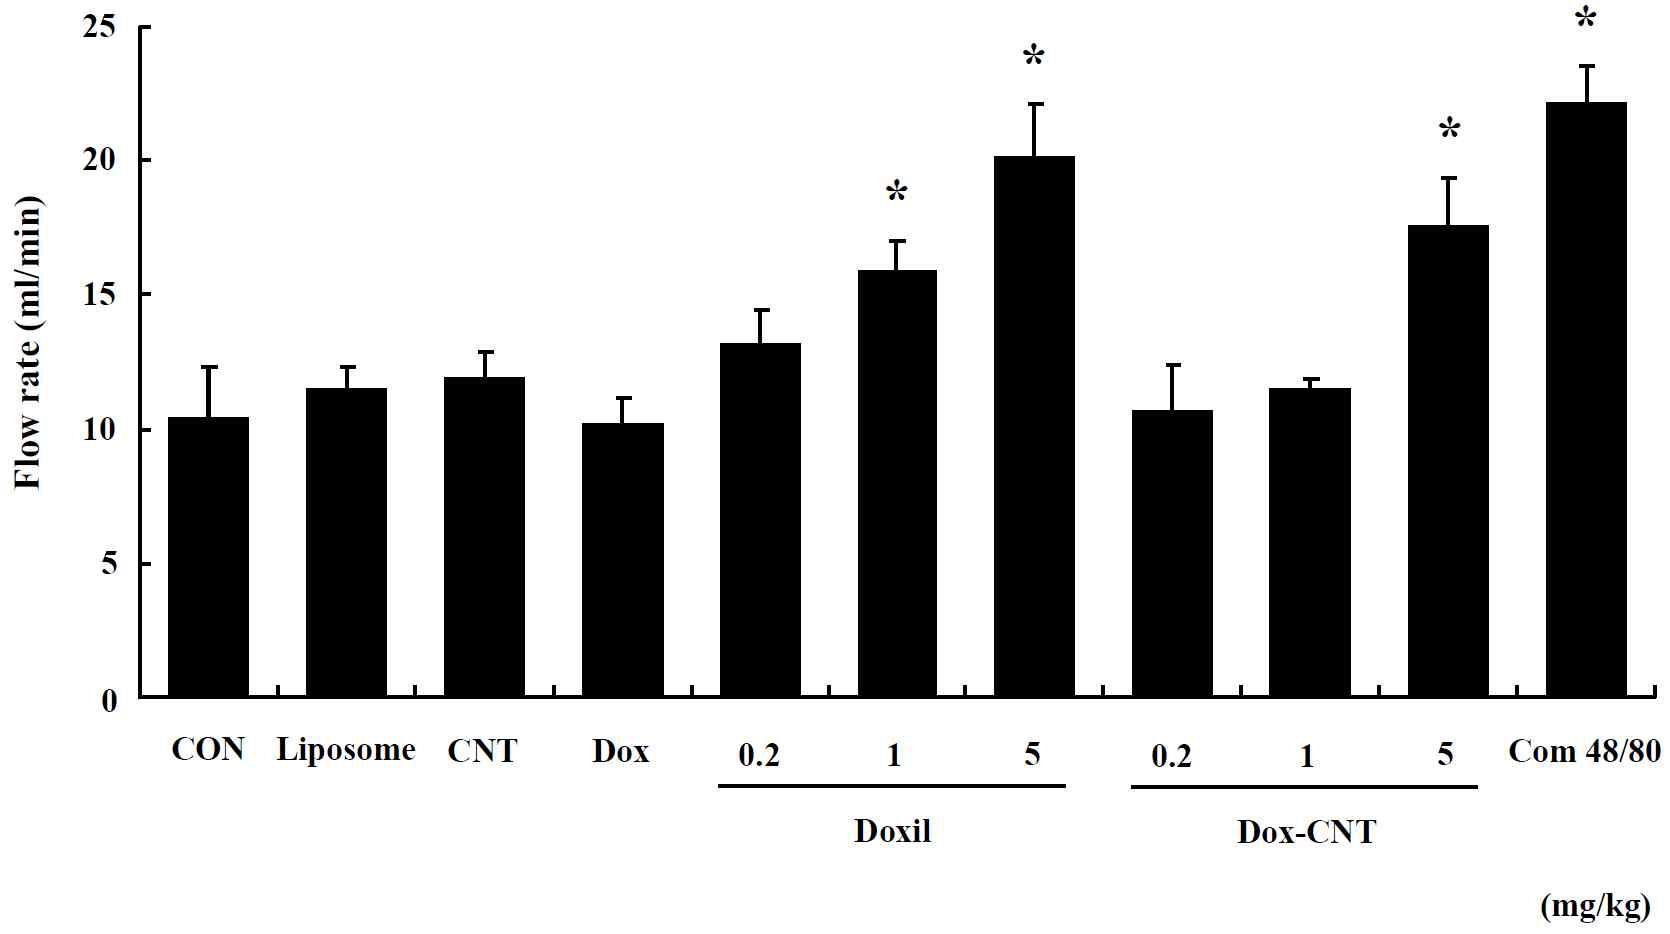 Blood flow rate in single exposed male mice. Mice were respectively administered by intravenous injection with liposome, CNT, Dox, Doxil (0.2, 1, 5 mg/kg) and Dox-CNT (0.2, 1, 5 mg/kg). The results are presented as mean ± SE (n = 10). * p < 0.05, significantly different from the control.